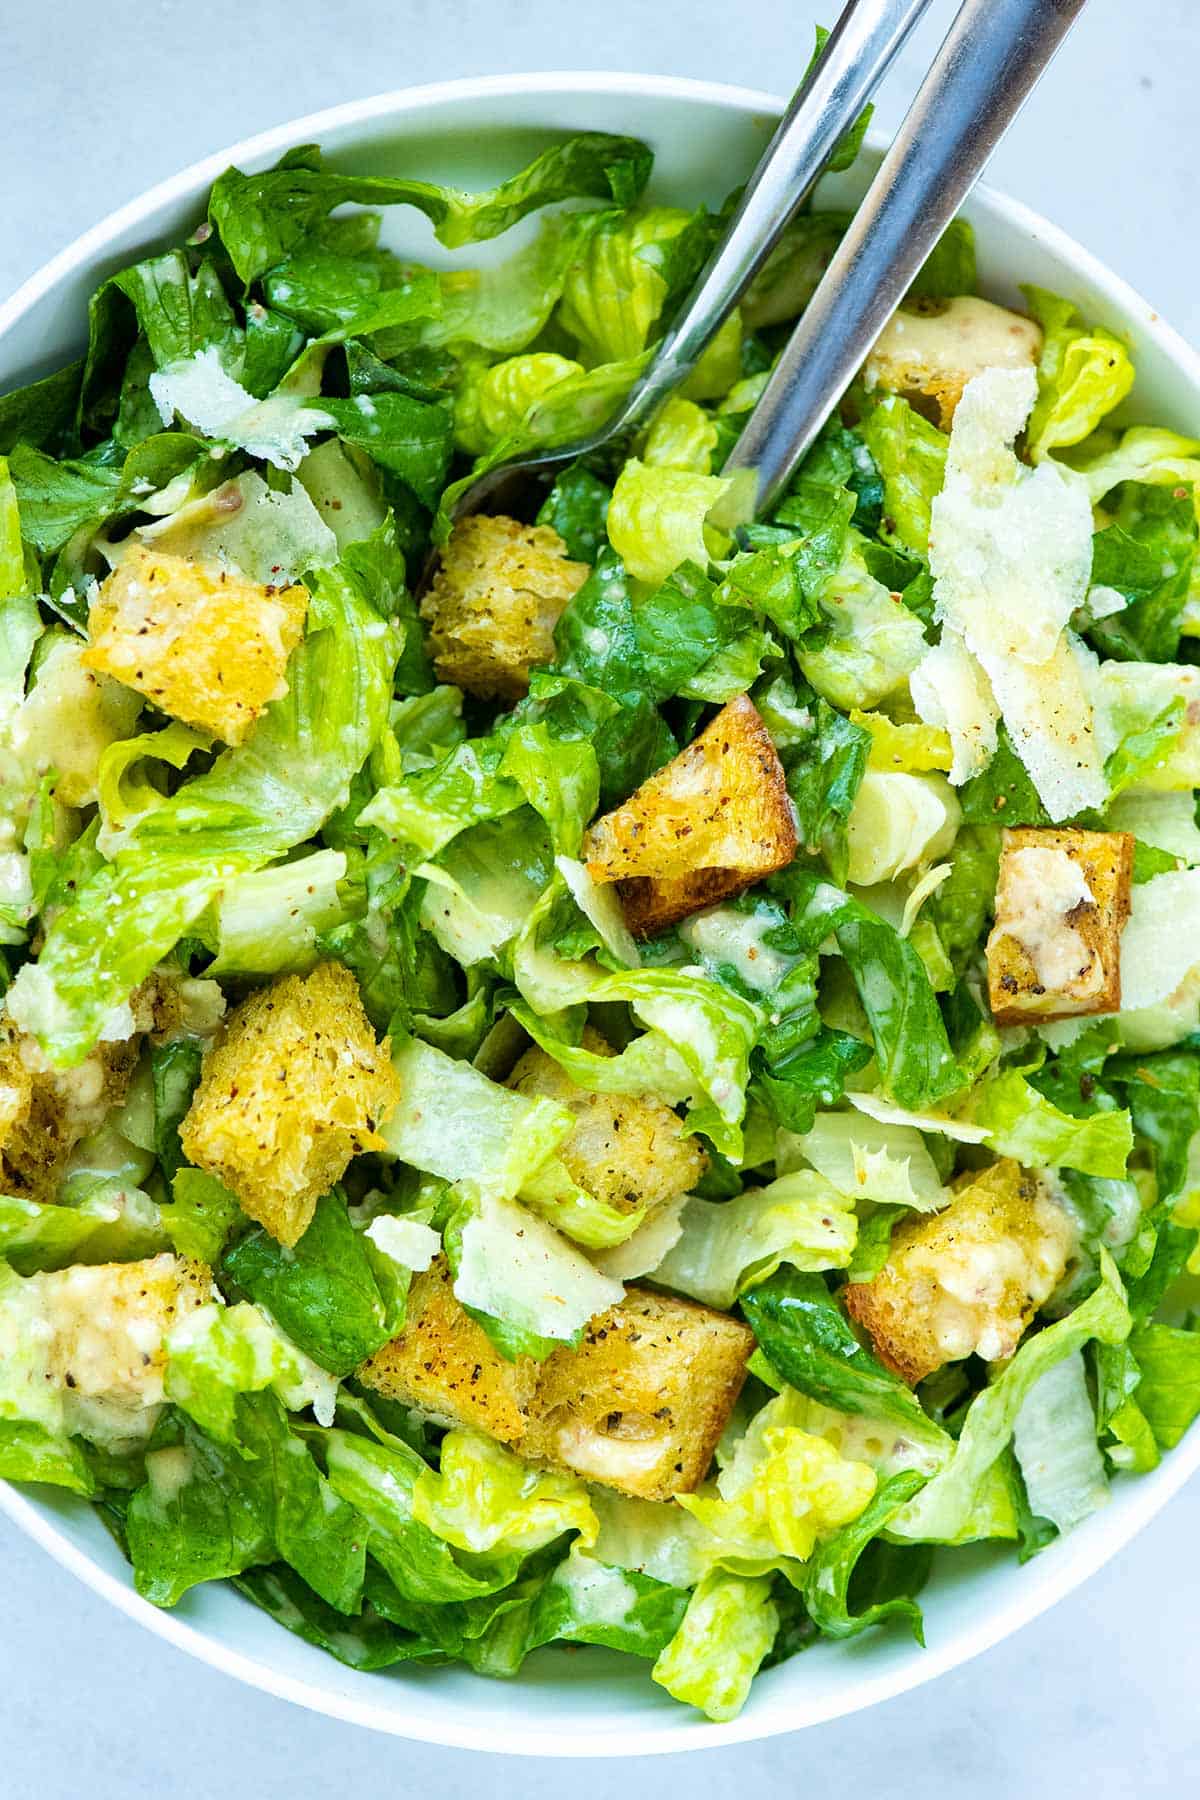 Caesar Salad ready to eat with homemade dressing, croutons and parmesan